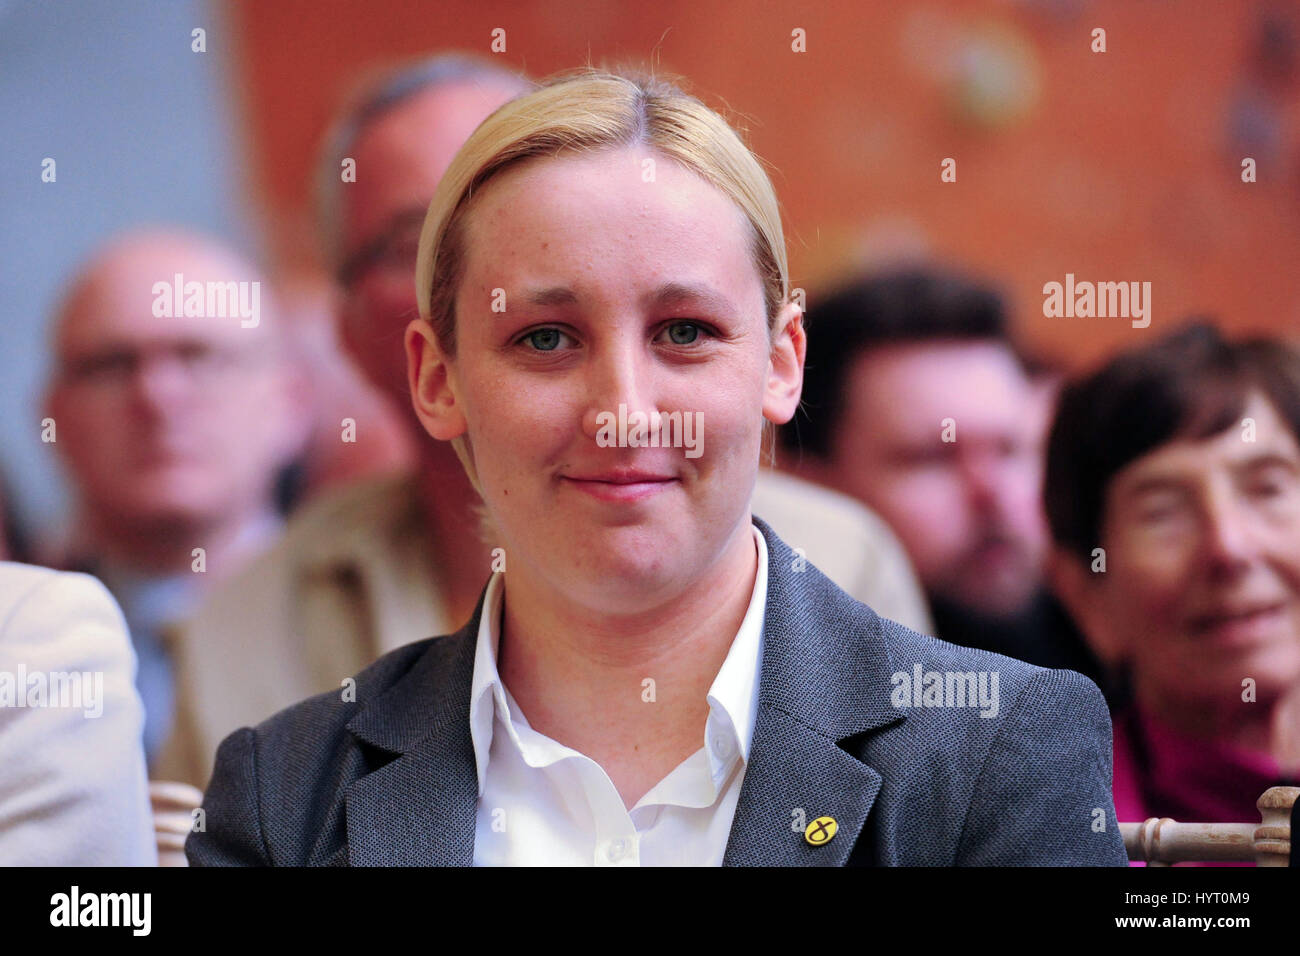 File image: Mhairi Black, the 20-year-old student who has unseated shadow foreign secretary Douglas Alexander and become the youngest MP since 1832, pictured at the launch of the party's general election manifesto Stock Photo